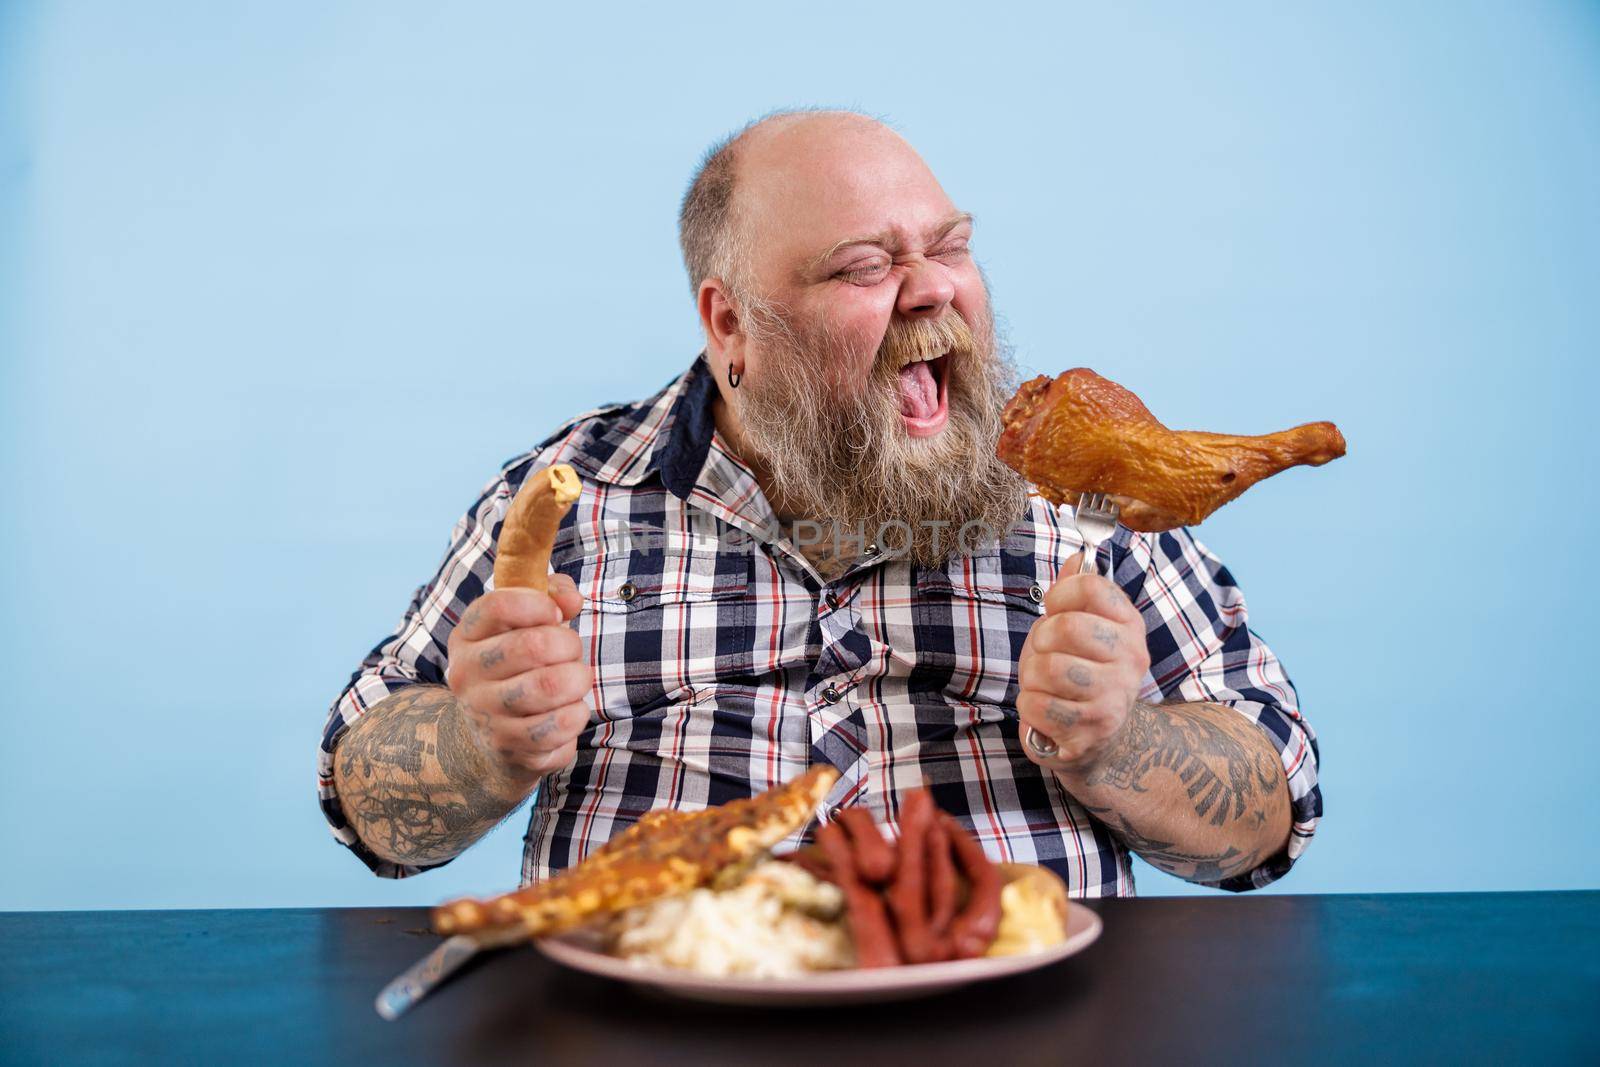 Hungry man with overweight eats chicken leg at table with fat food on blue background by Yaroslav_astakhov